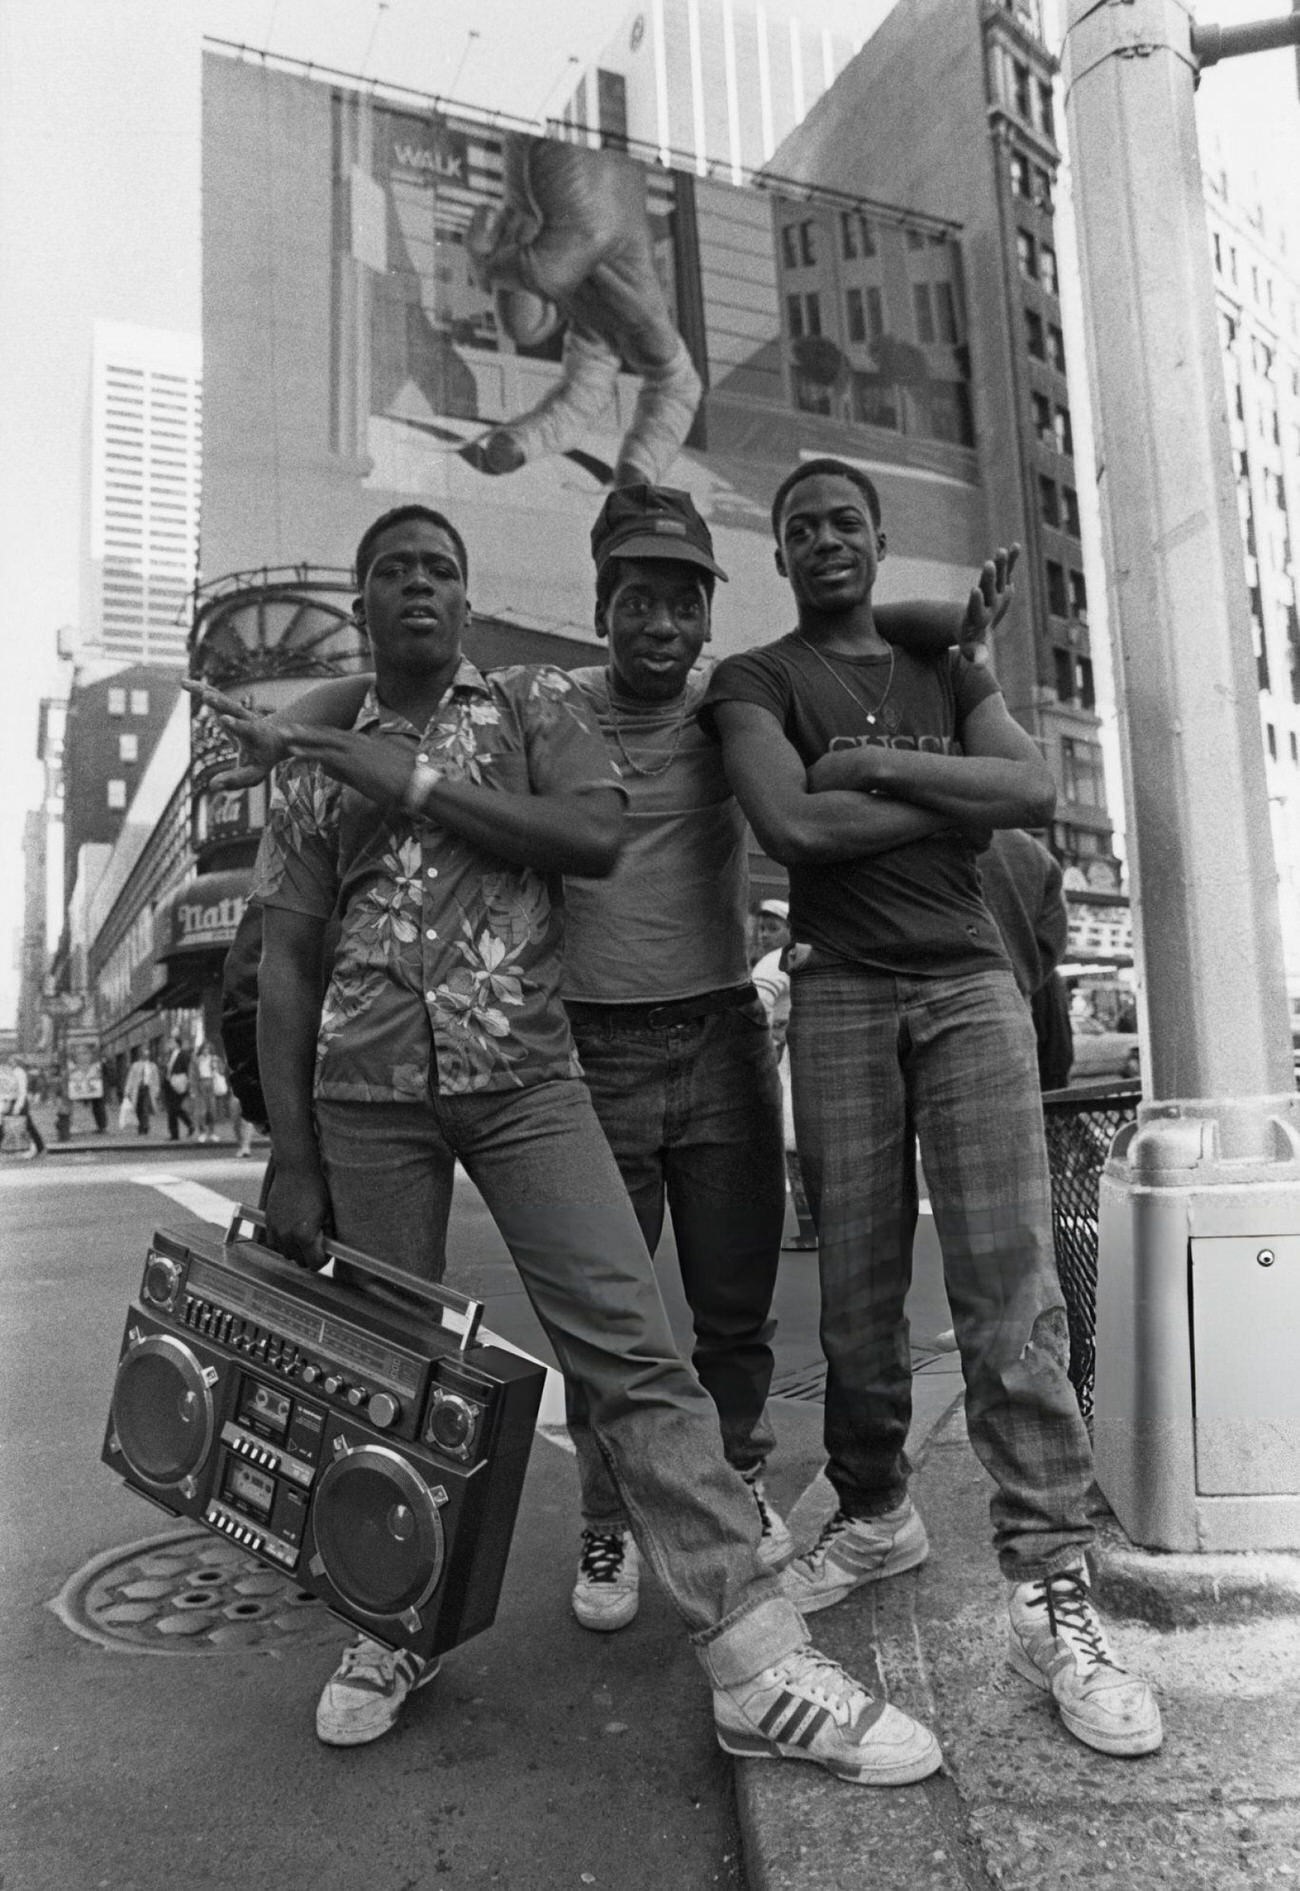 Three Teenage Boys Posing In Times Square With A Boombox, 1987.